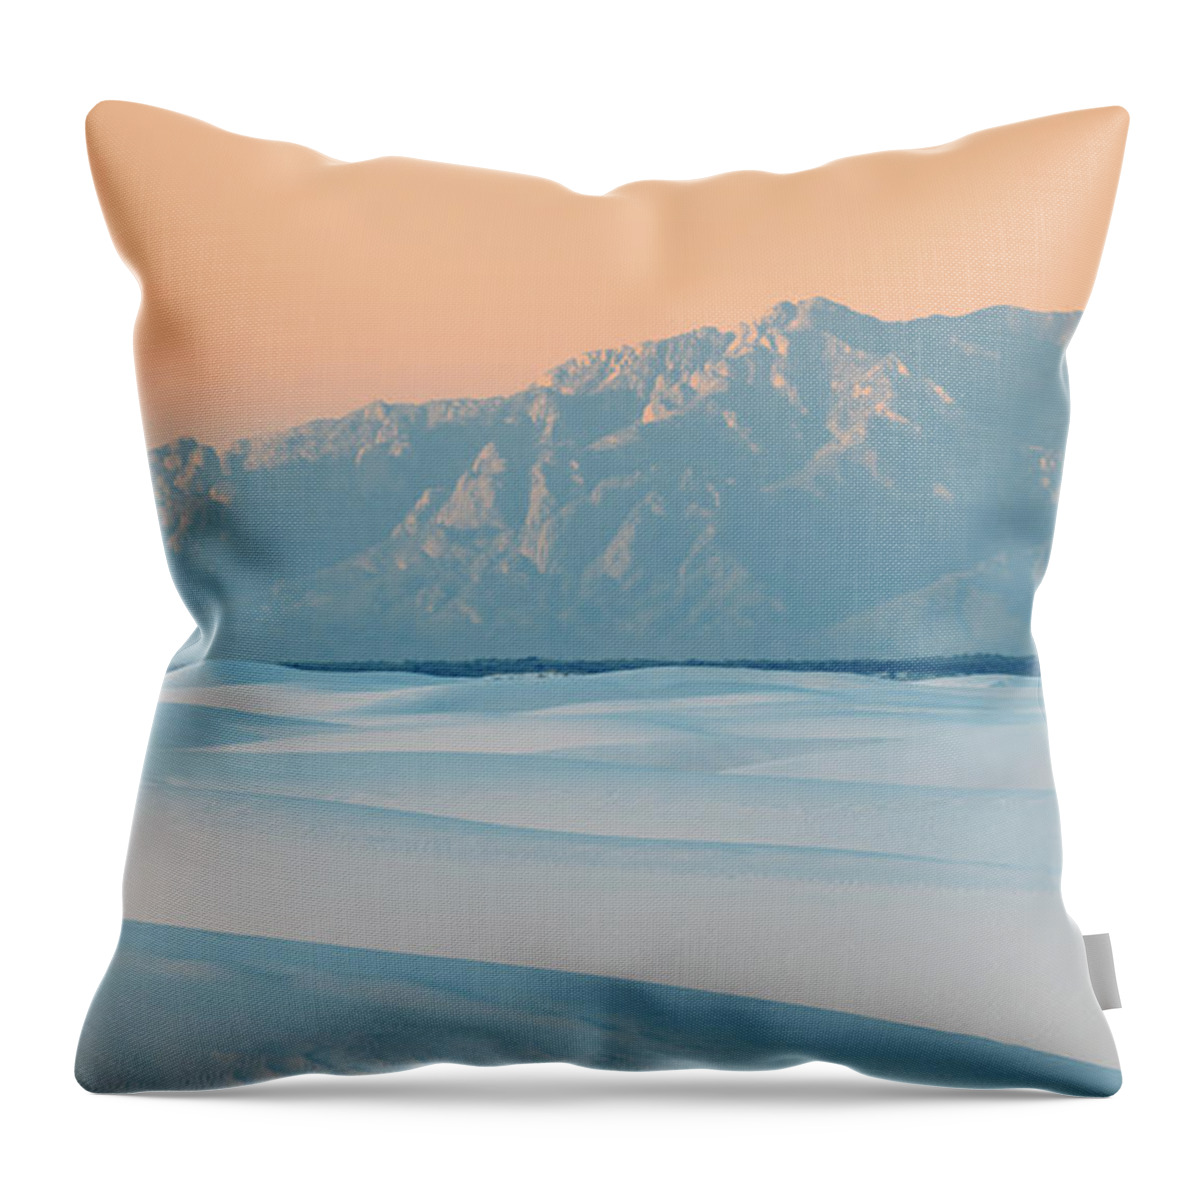 White Sands Throw Pillow featuring the photograph Martian Sunrise At White Sands by Doug Sturgess